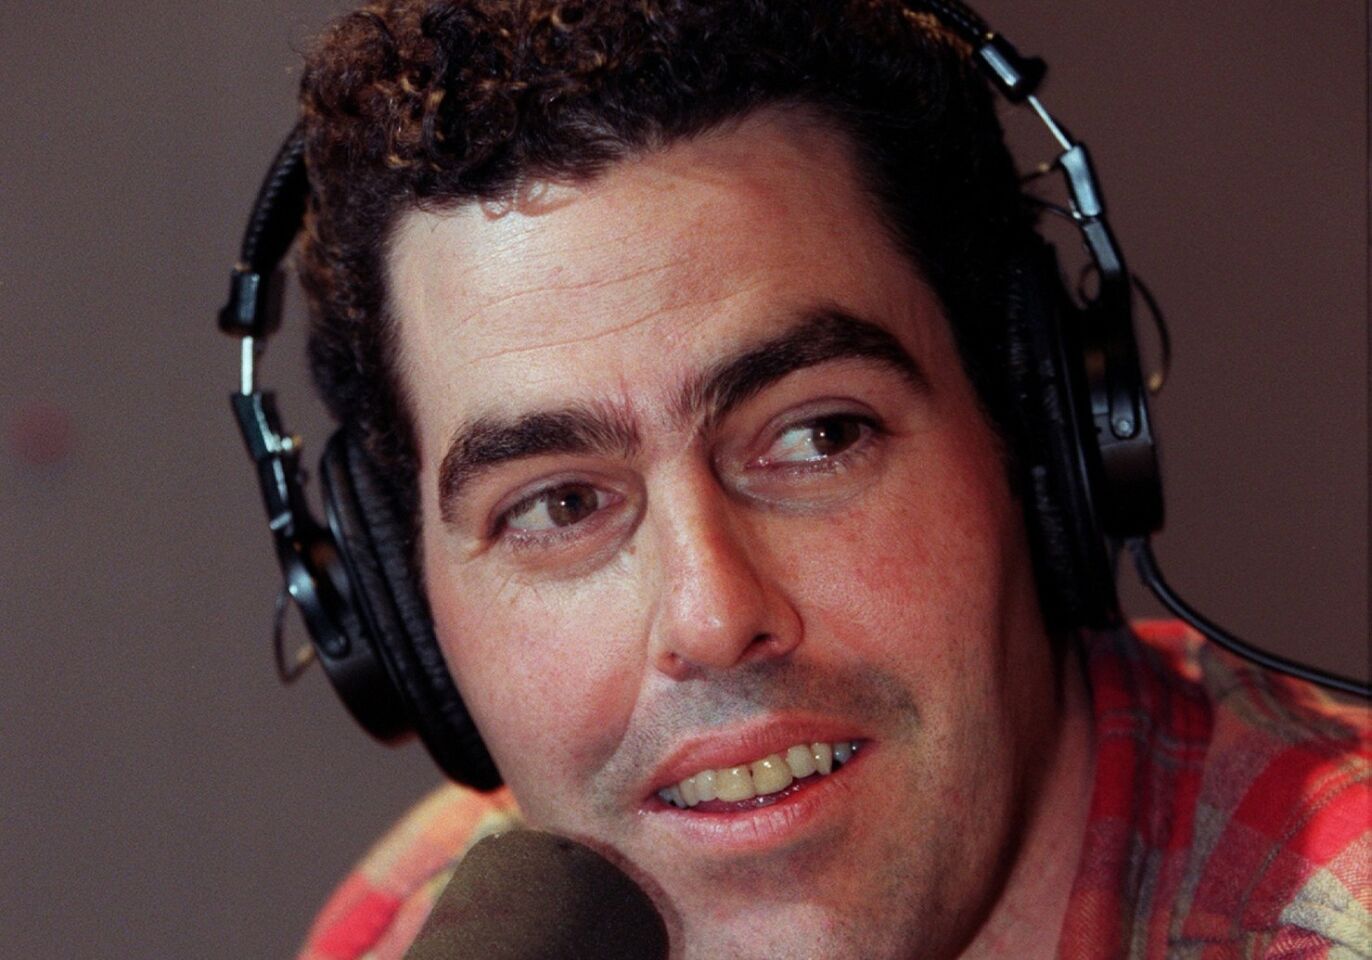 The late-night talk show never reached a notable viewership level. Comedy Central pushed the show's time slot later and dropped its live audience before finally canceling it several months later. Carolla was on air for one season.